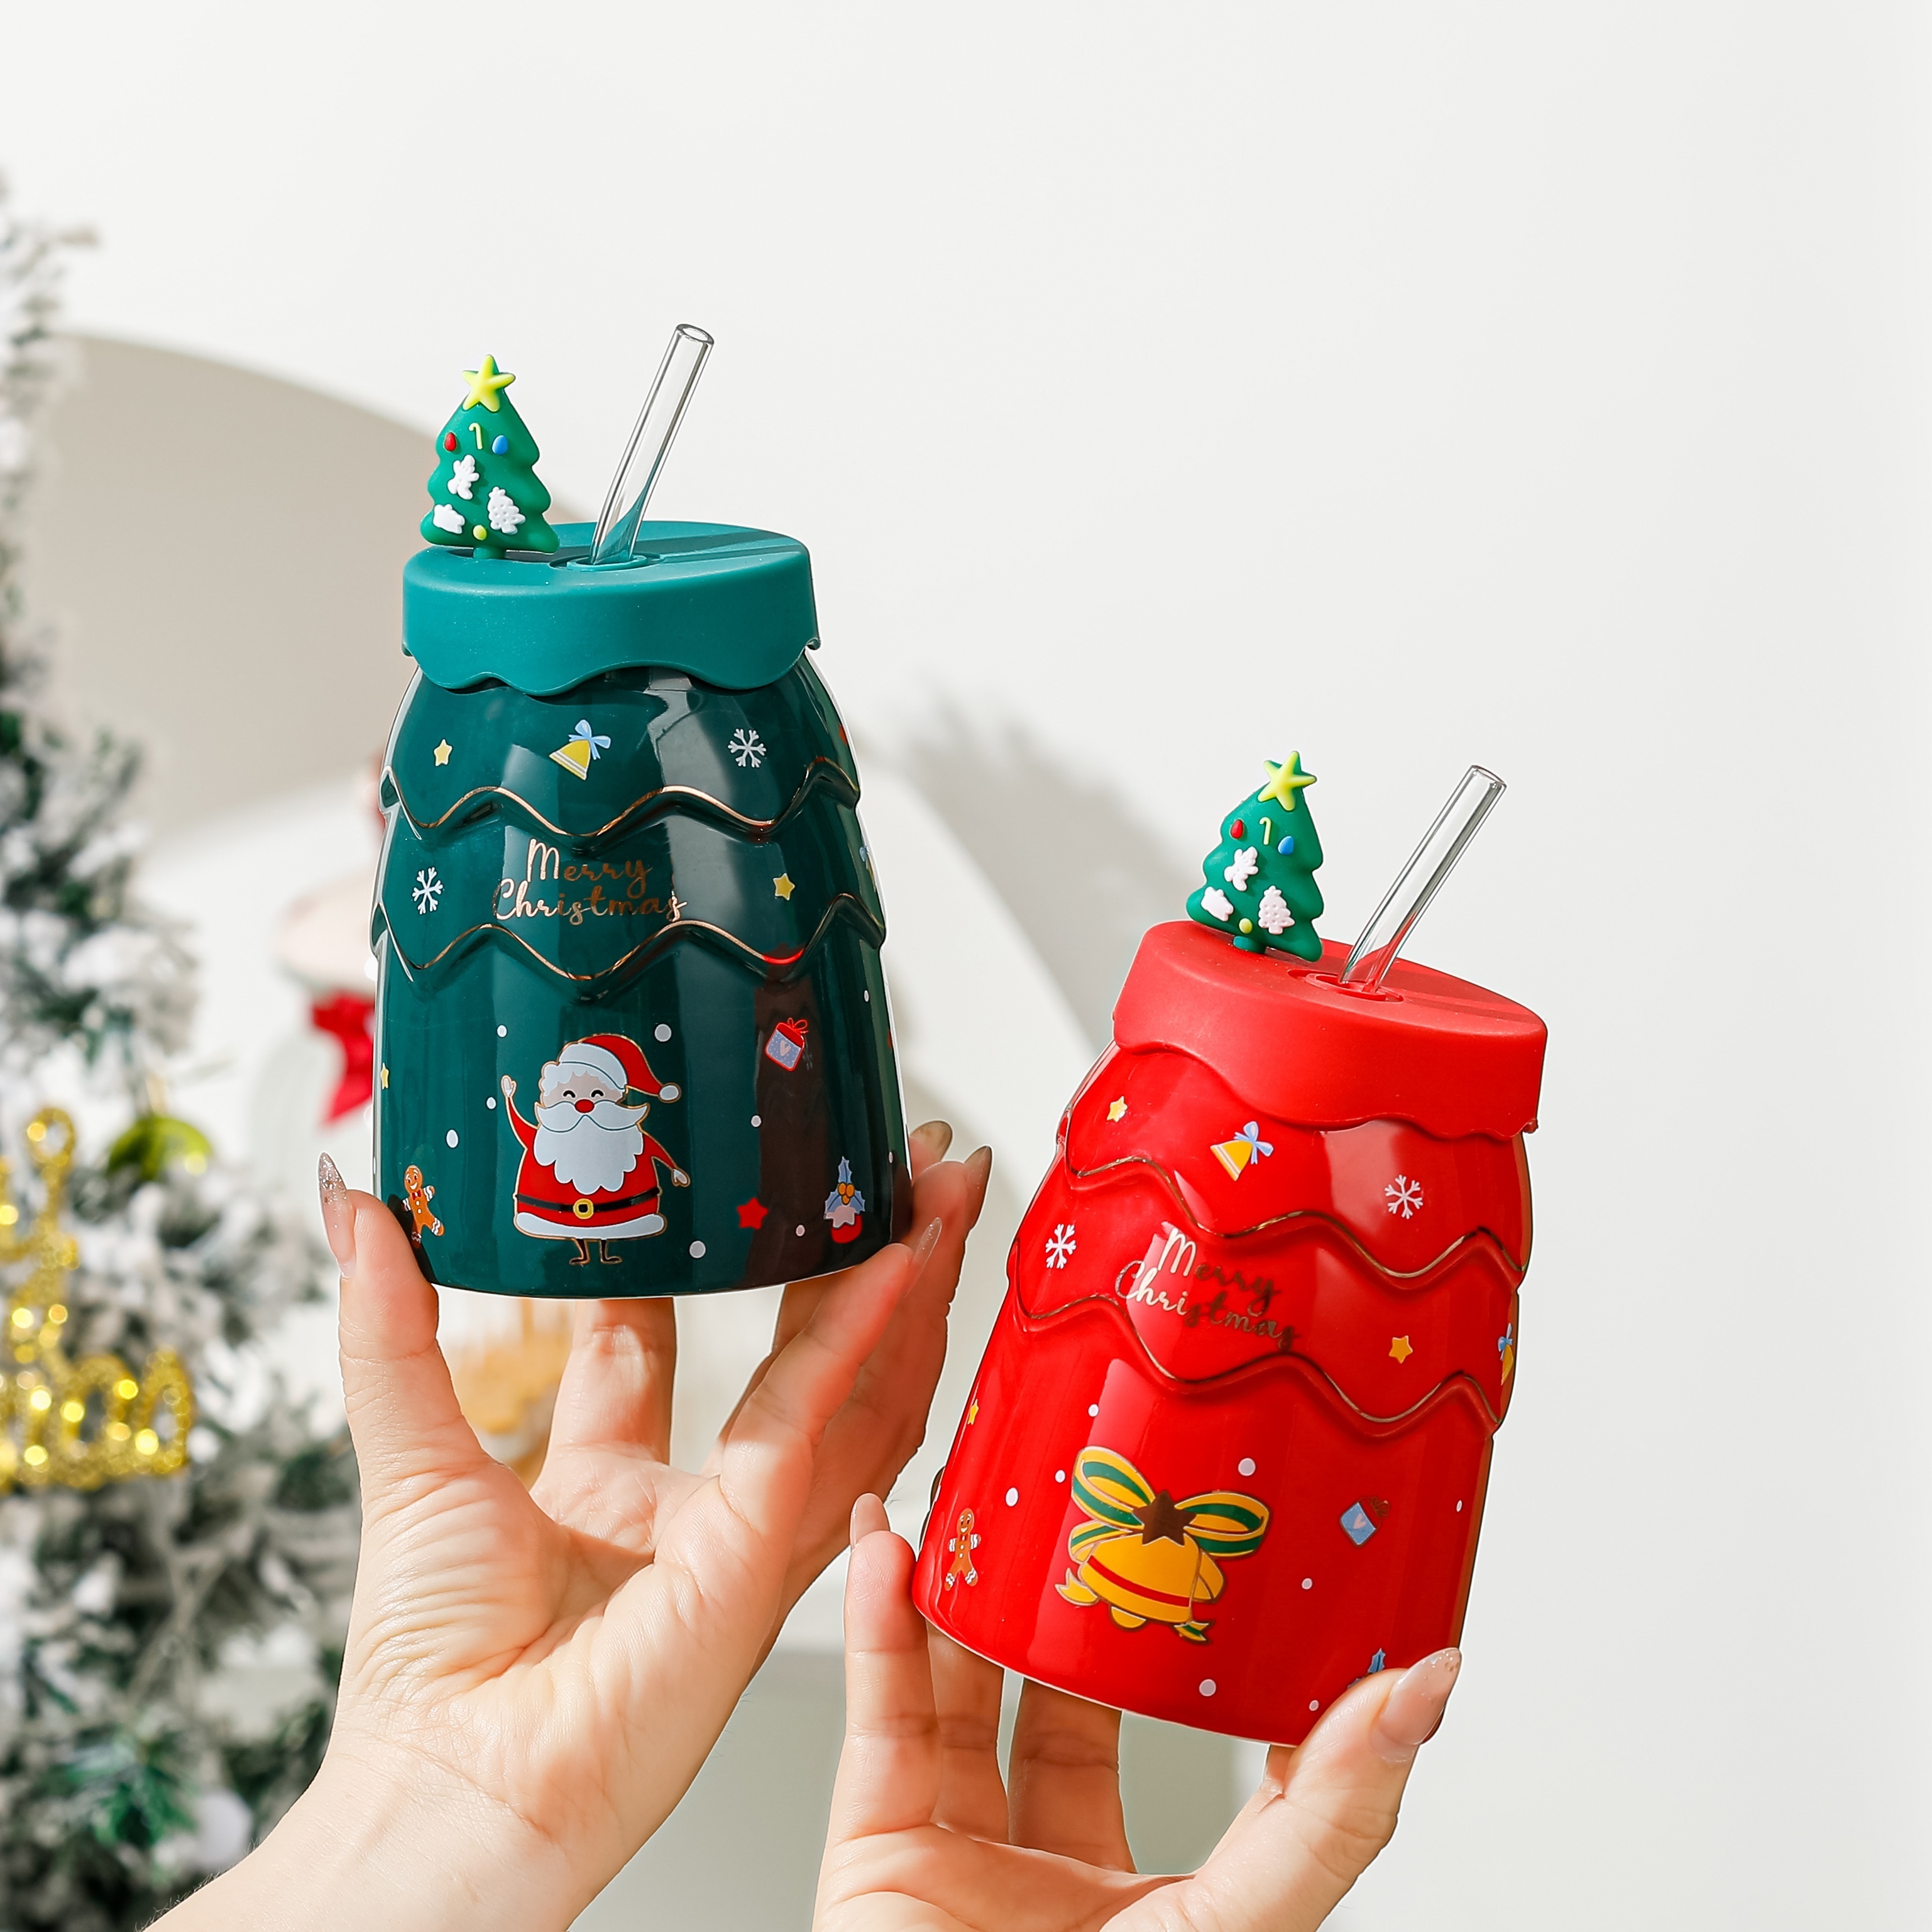 Novelty Christmas Gifts: New Collection for Women